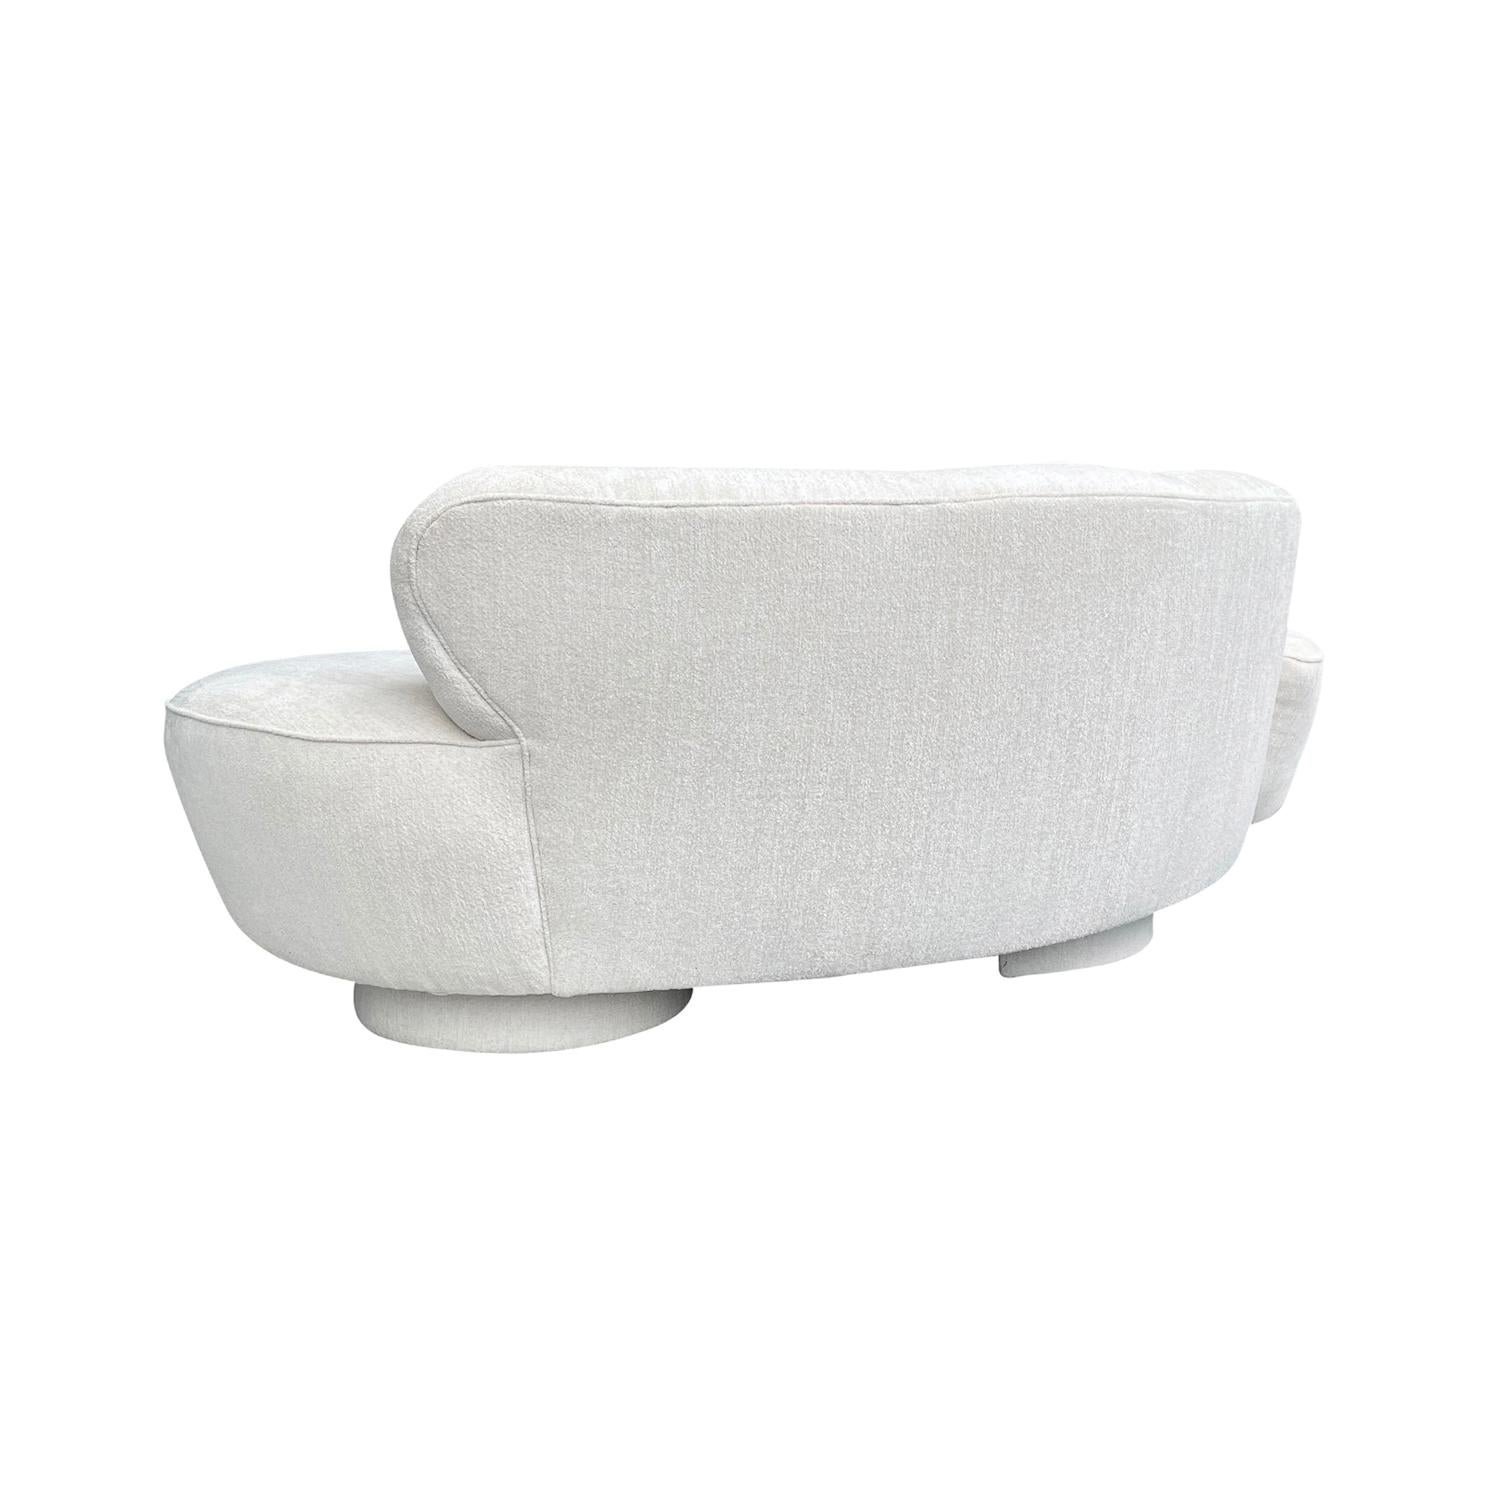 20th Century White American Directional Sofa, Curved Settee by Vladimir Kagan For Sale 2